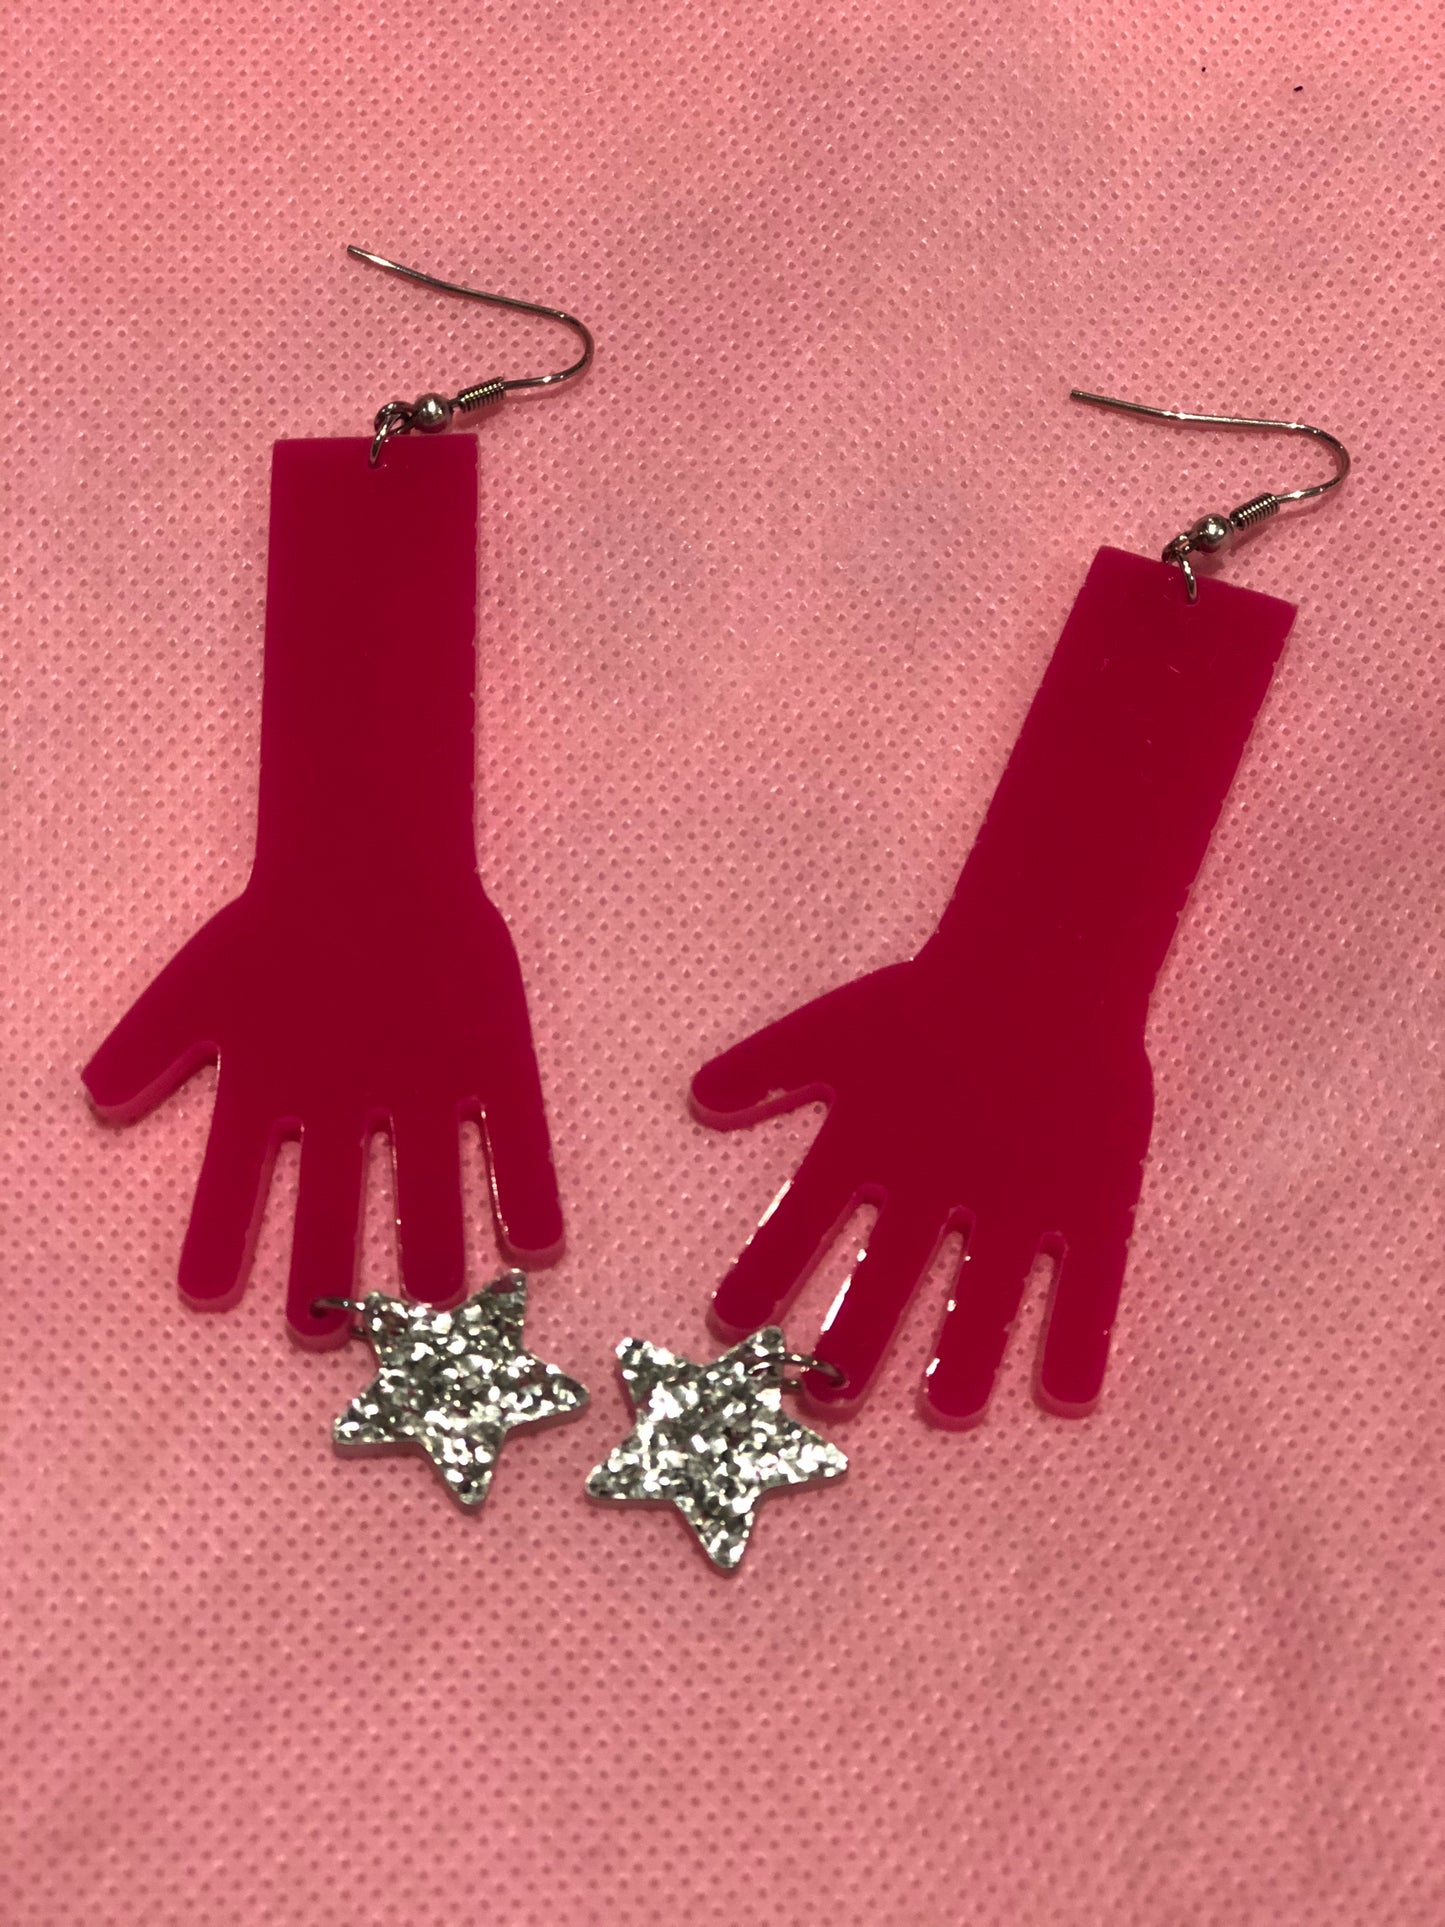 Hot Pink Hands with Silver Glitter Dangle Earrings by No Basic Bombshell - Spark Pretty